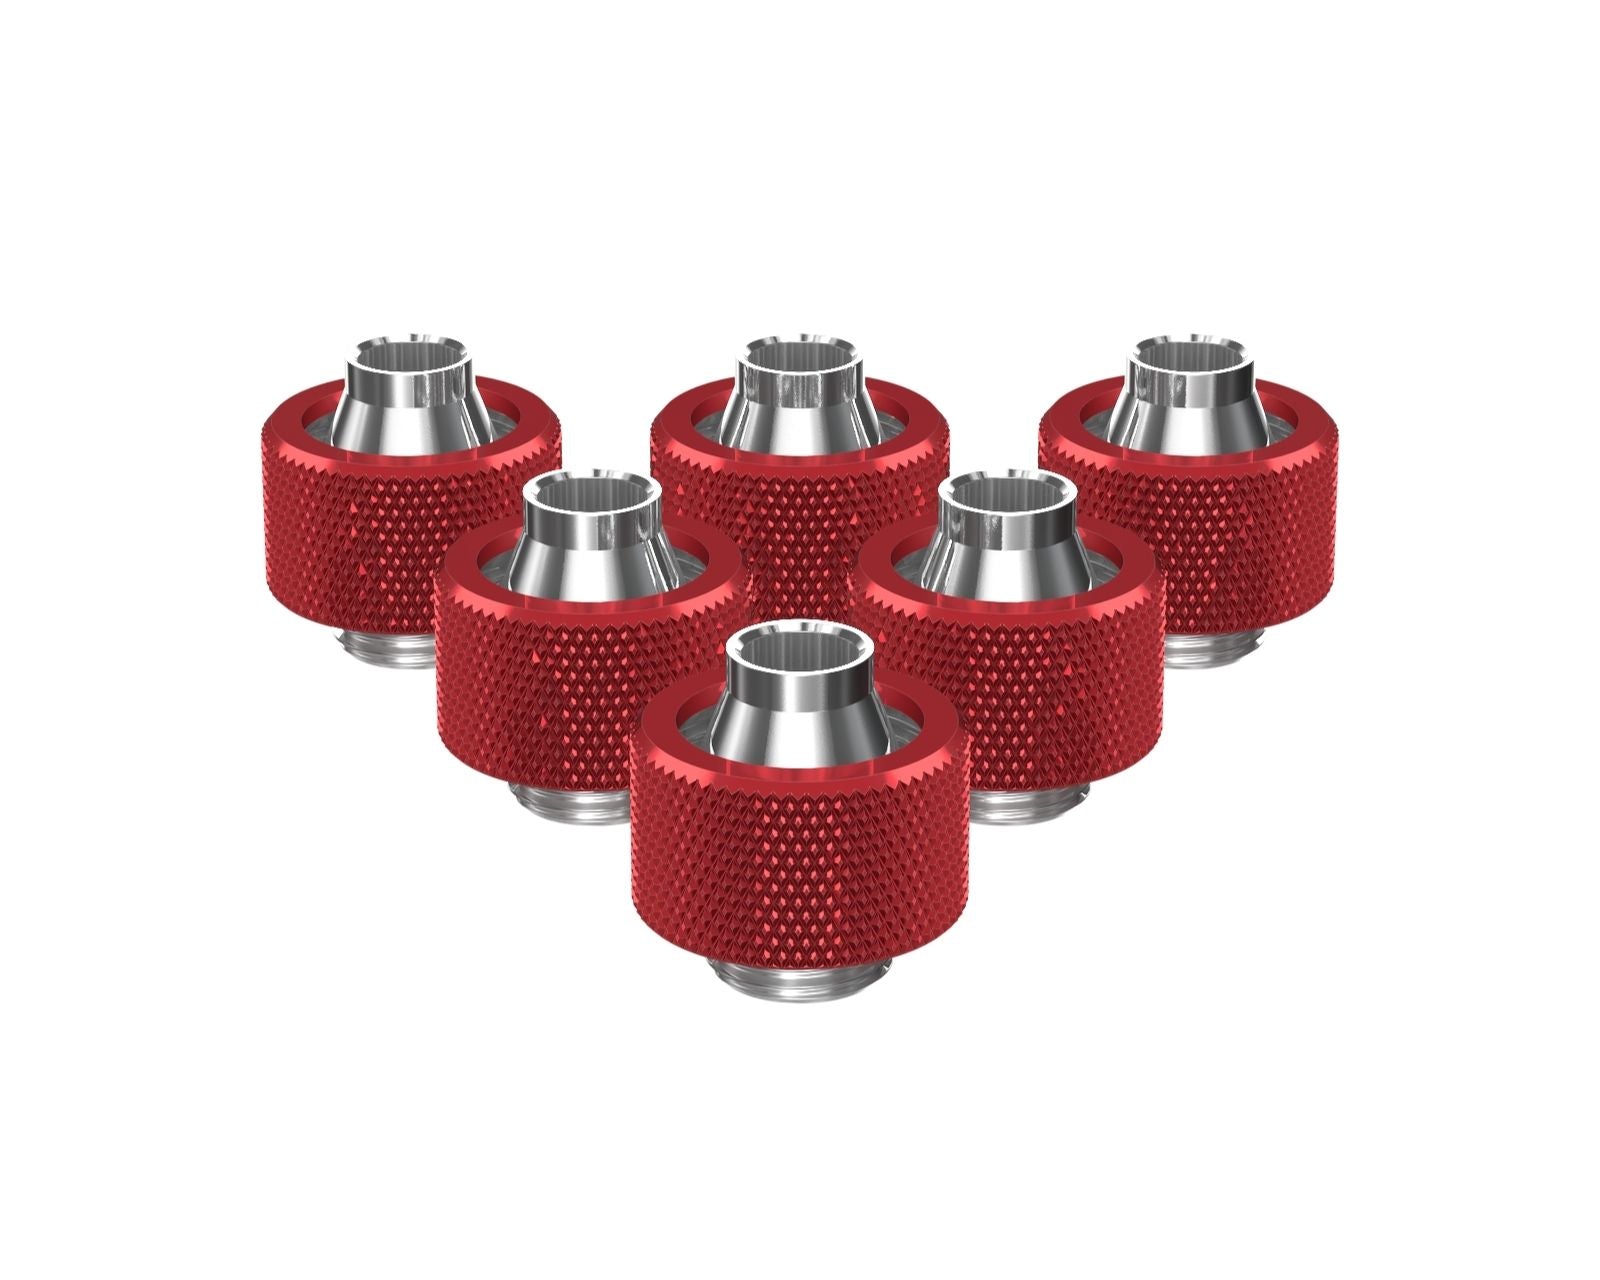 PrimoChill SecureFit SX - Premium Compression Fitting For 3/8in ID x 5/8in OD Flexible Tubing 6 Pack (F-SFSX58-6) - Available in 20+ Colors, Custom Watercooling Loop Ready - Candy Red